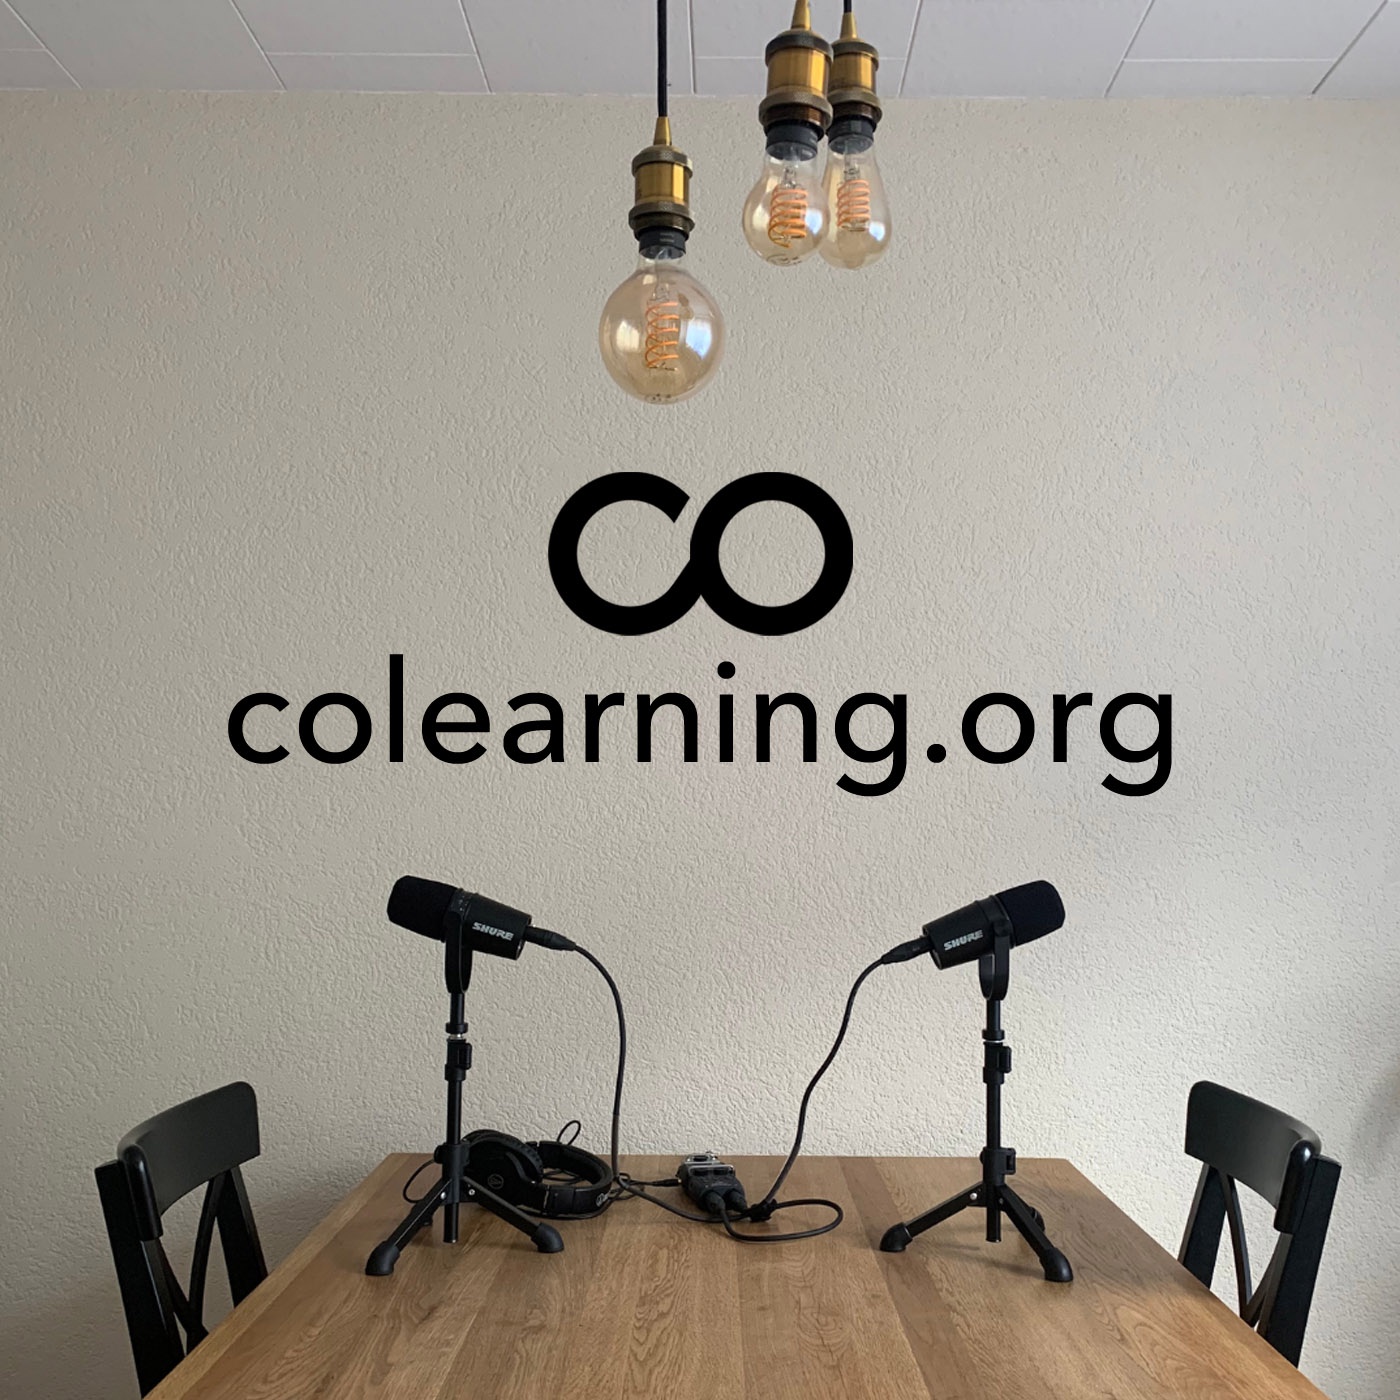 Colearning